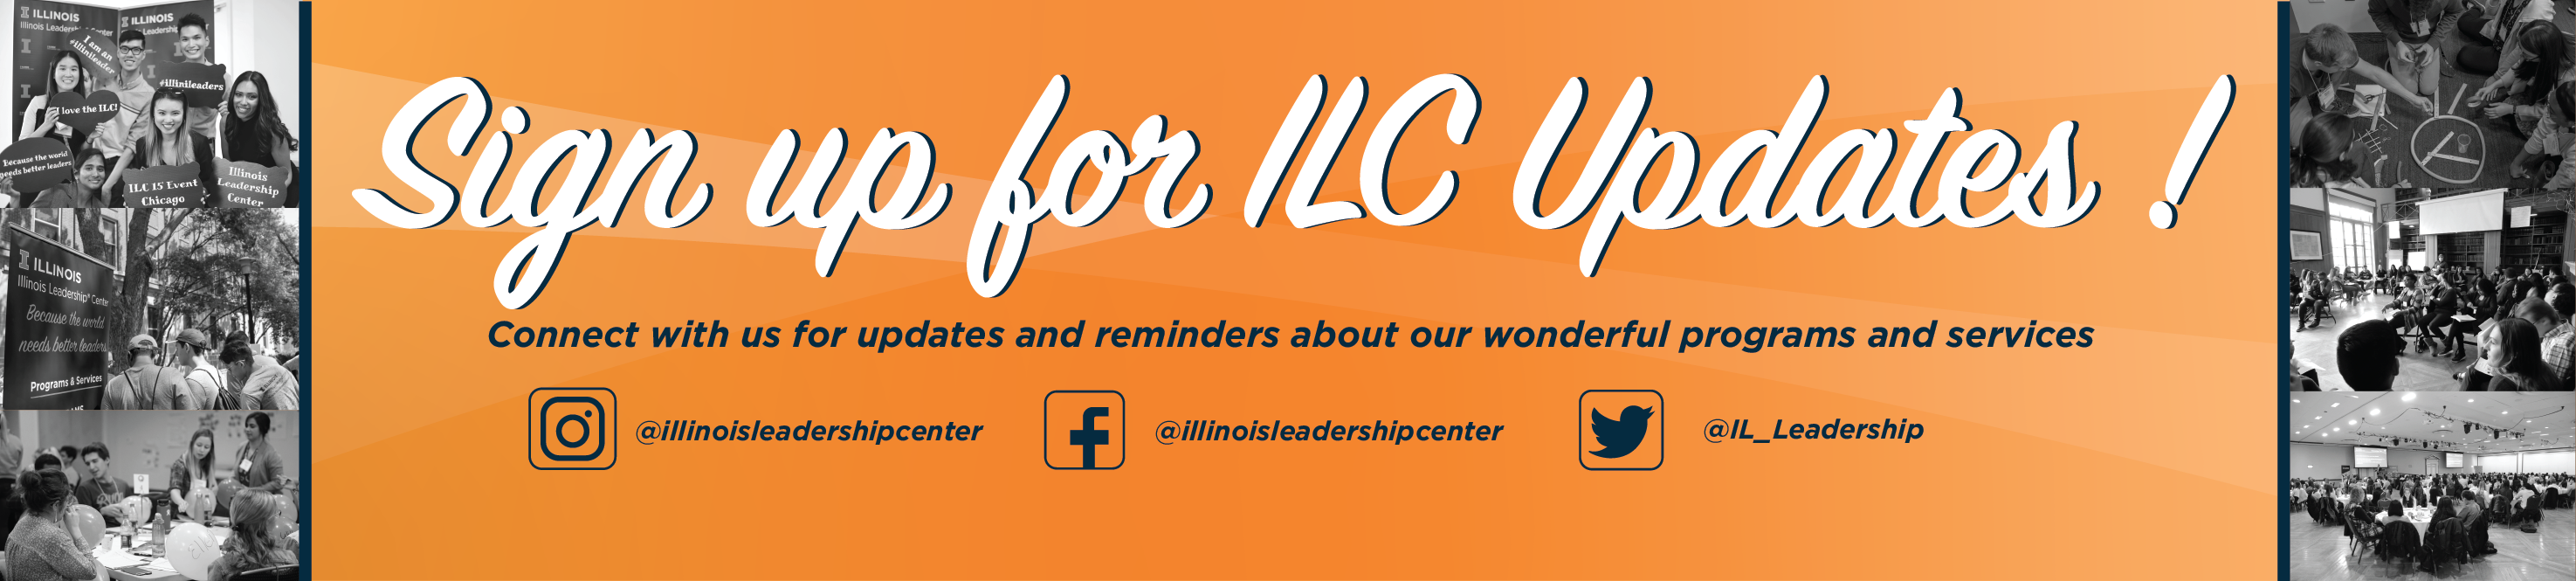 Sign up for ILC updates by going to https://groups.webservices.illinois.edu/subscribe/97630